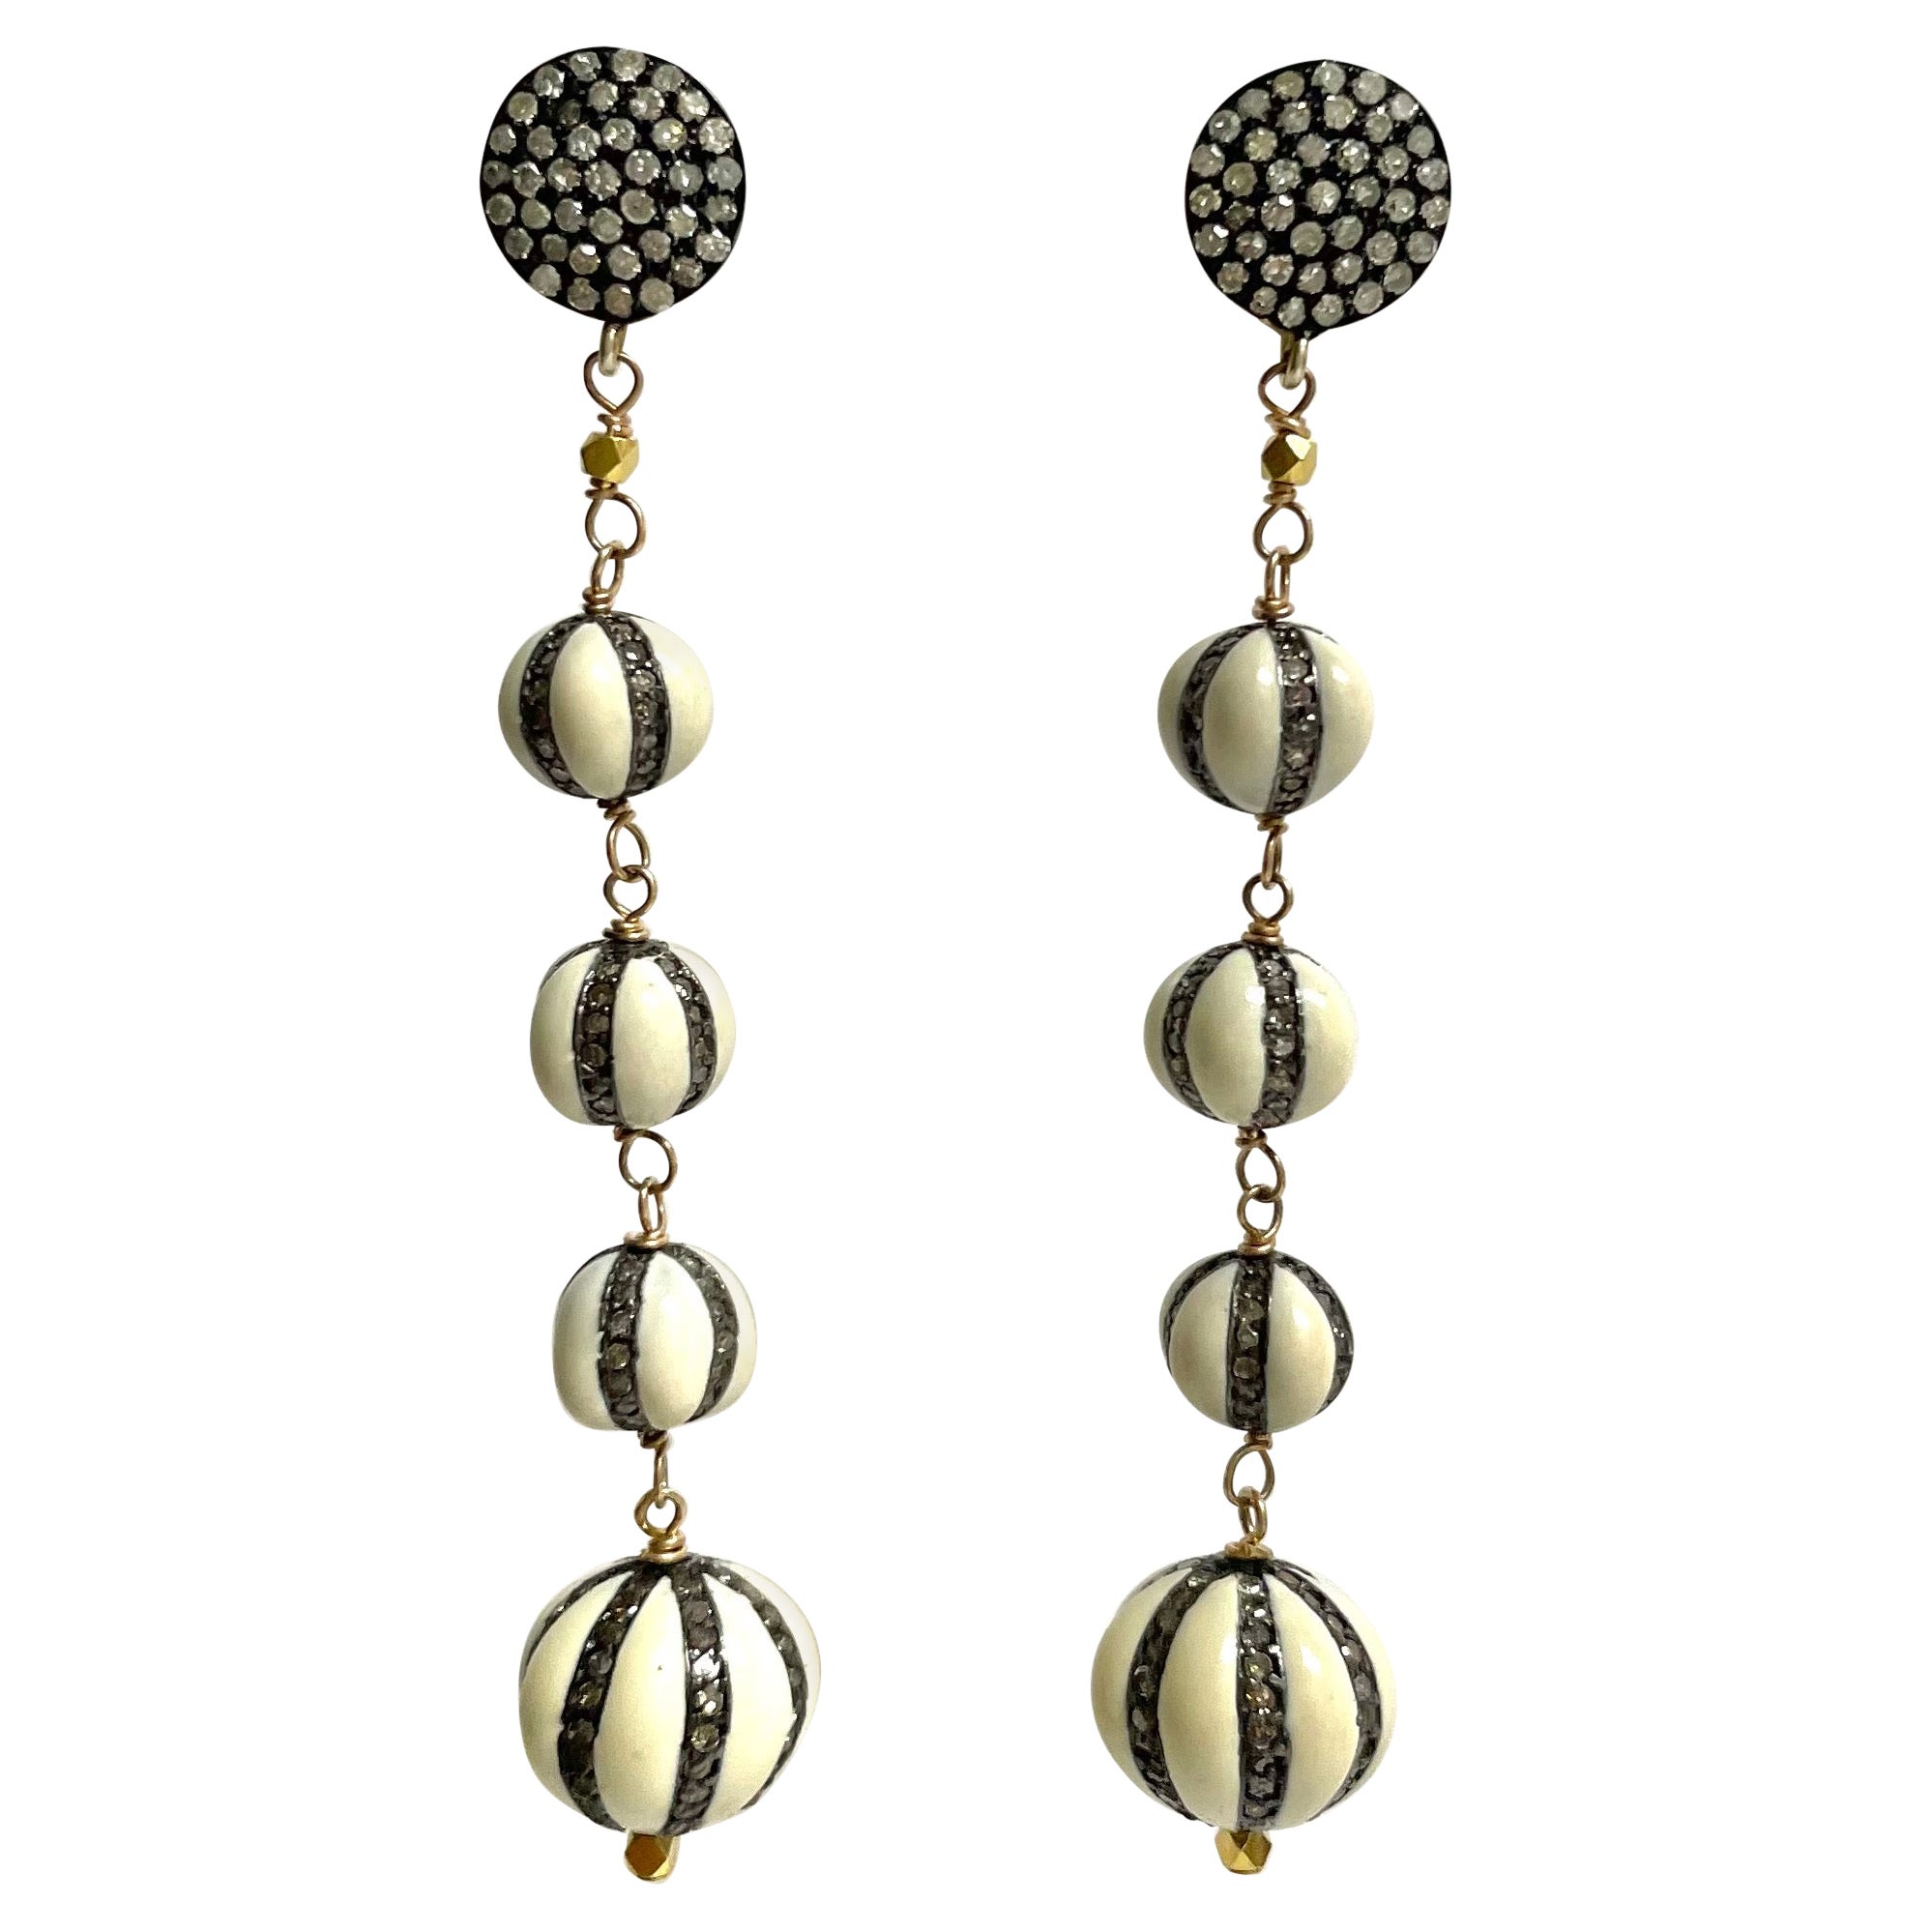 Enamel and Pave Diamond Melon Ball Design Earrings For Sale